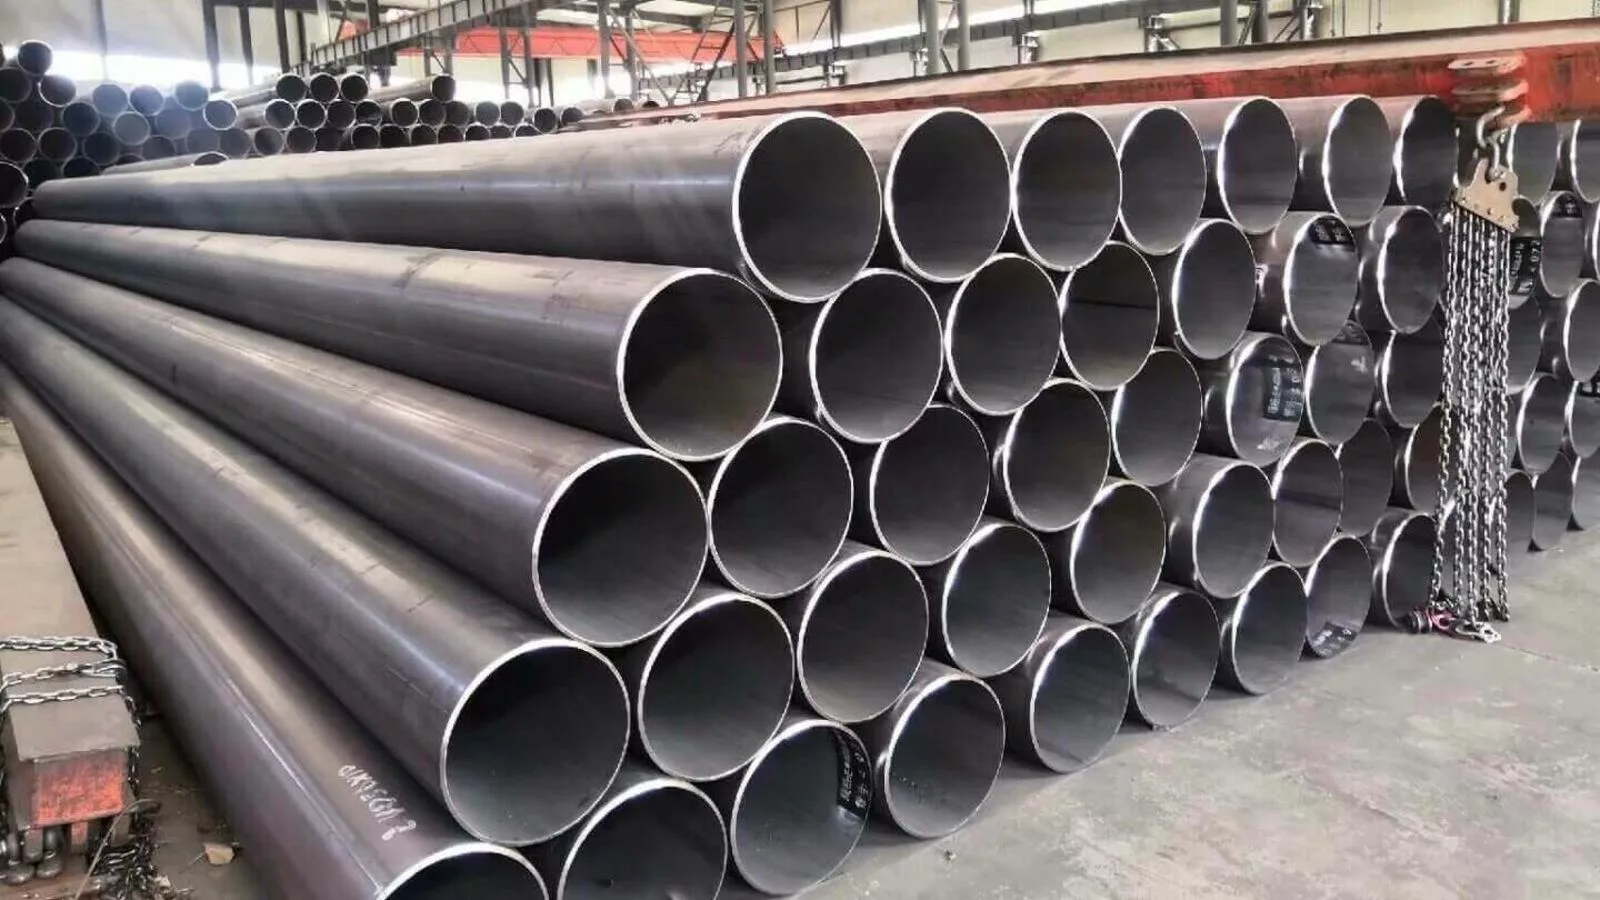 Vibhor Steel Tubes raises ₹21 crore from anchor investors ahead of IPO